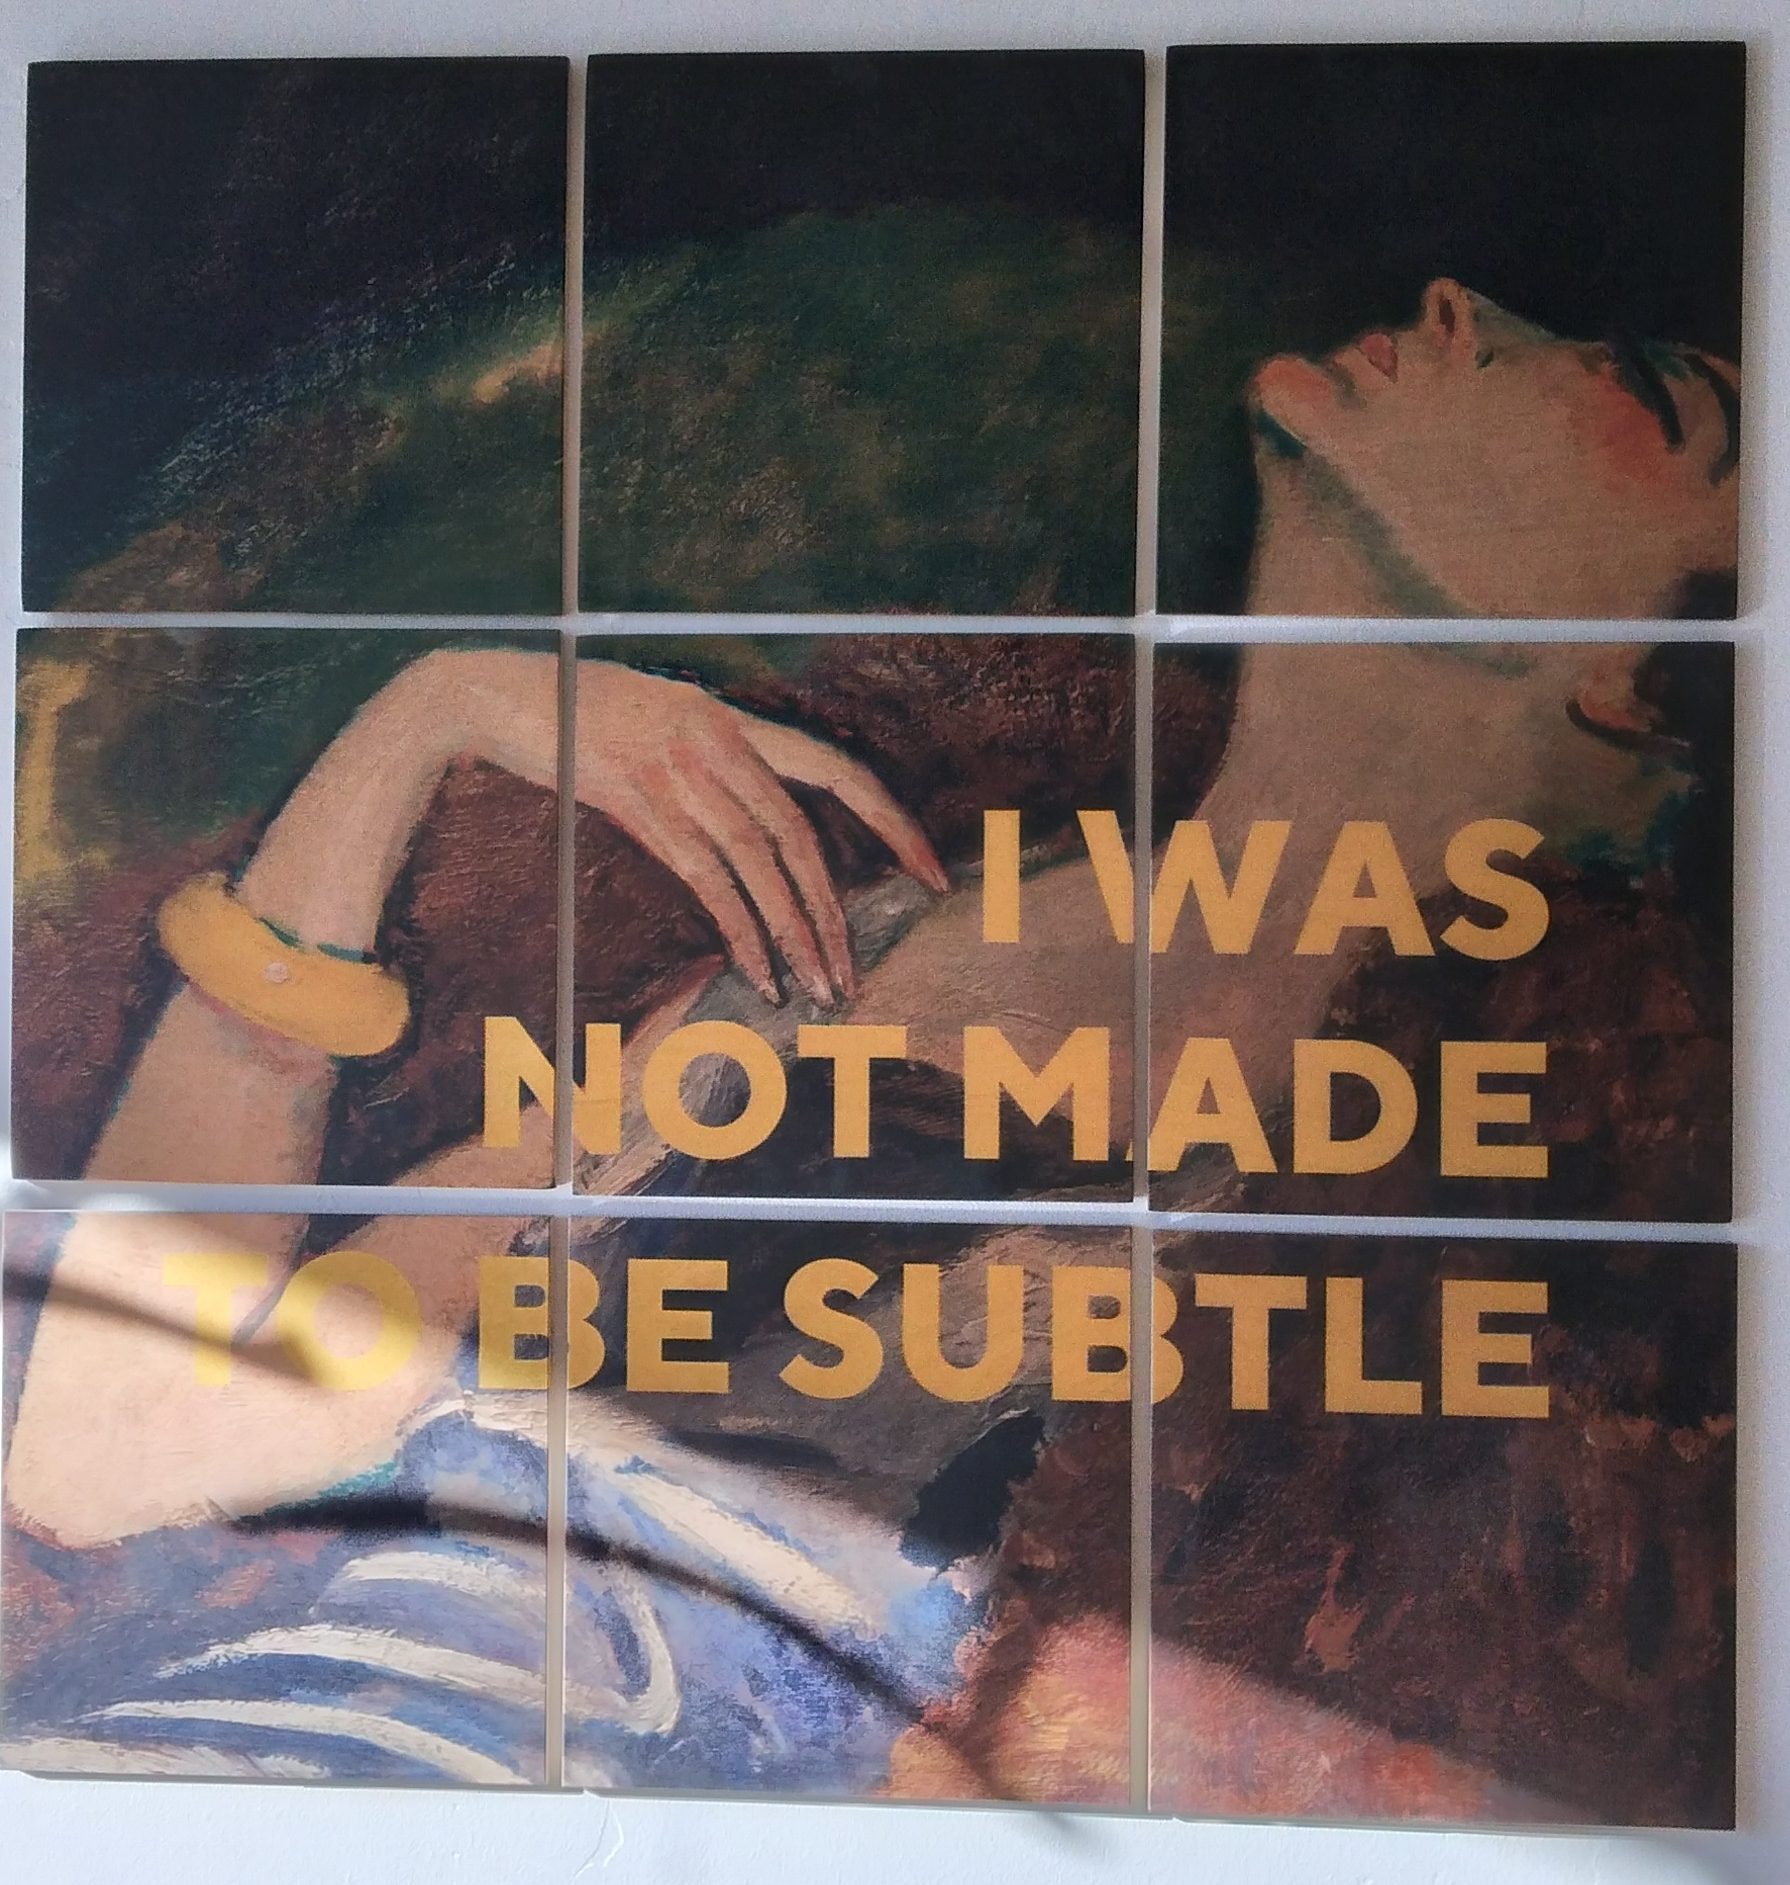 Painting on display at Crazy Woman Cellars. The text "I Was Not Made to be Subtle" is printed over a painting of a woman.